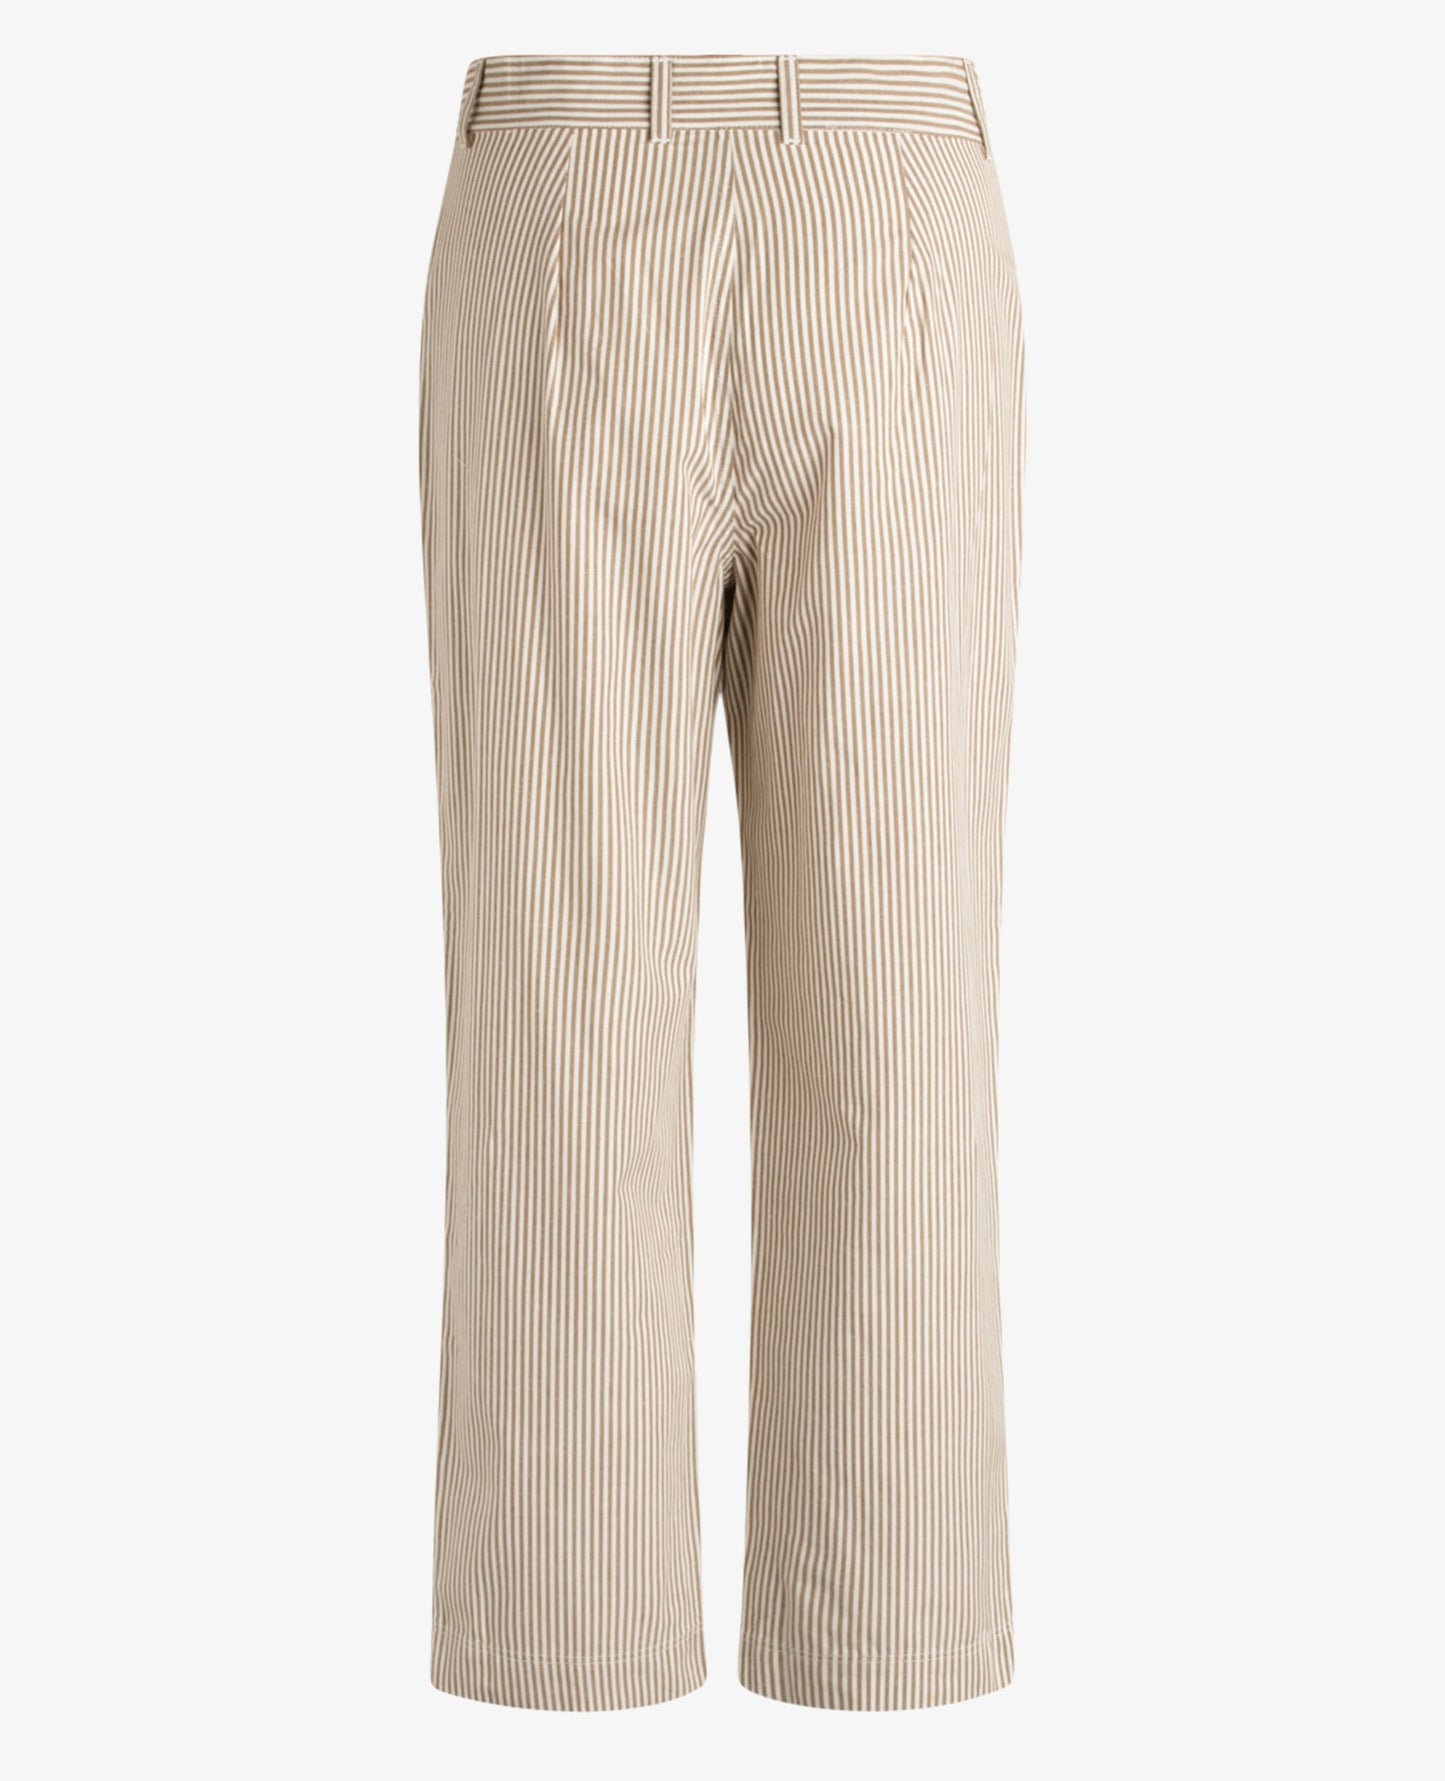 ICONIC STRIPES TROUSERS